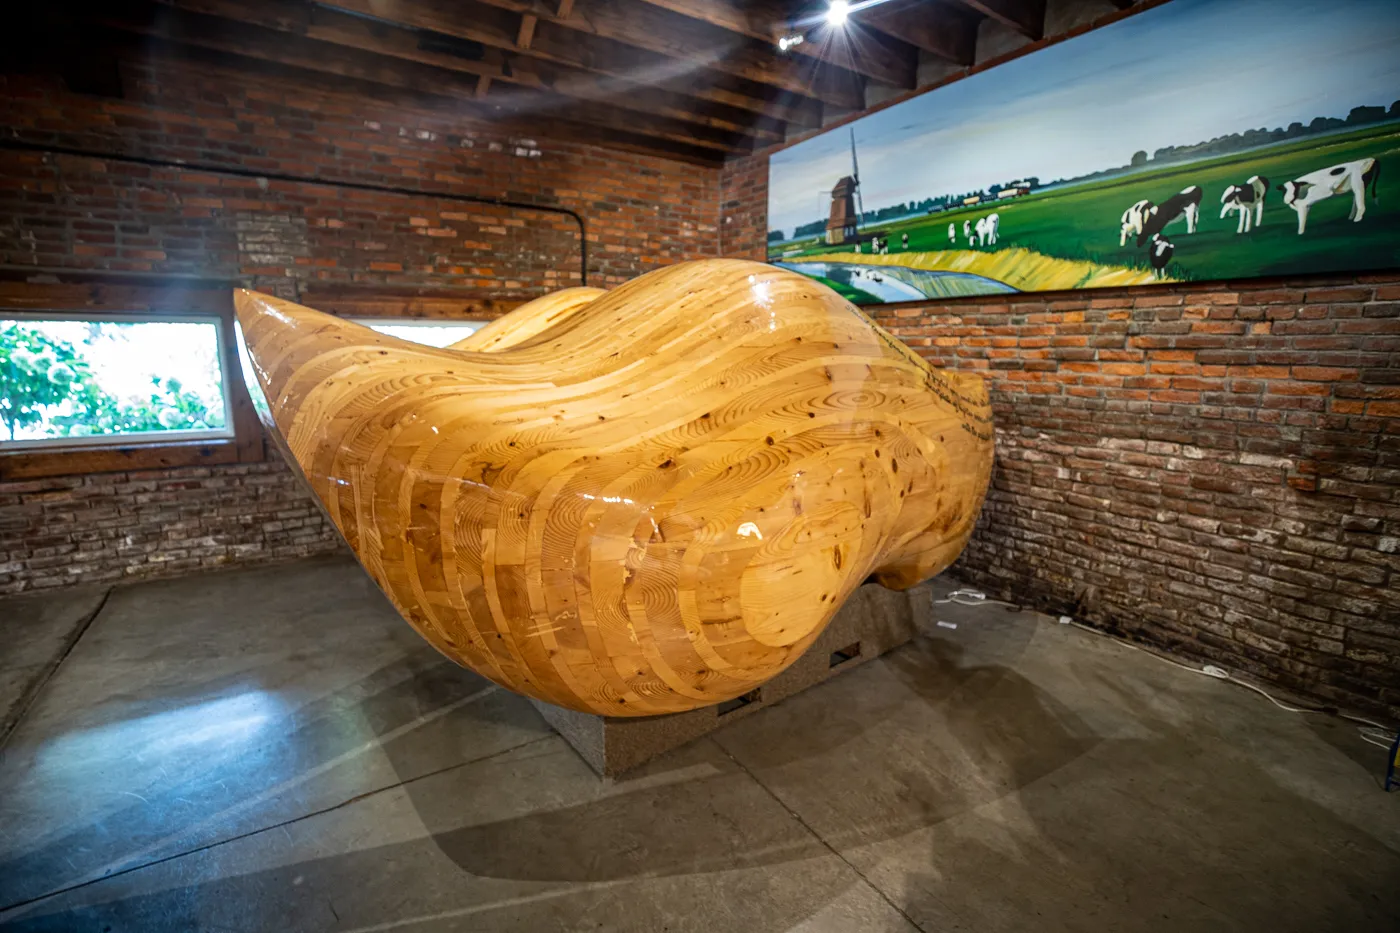 World's Largest Wooden Shoes in Casey, Illinois roadside attraction